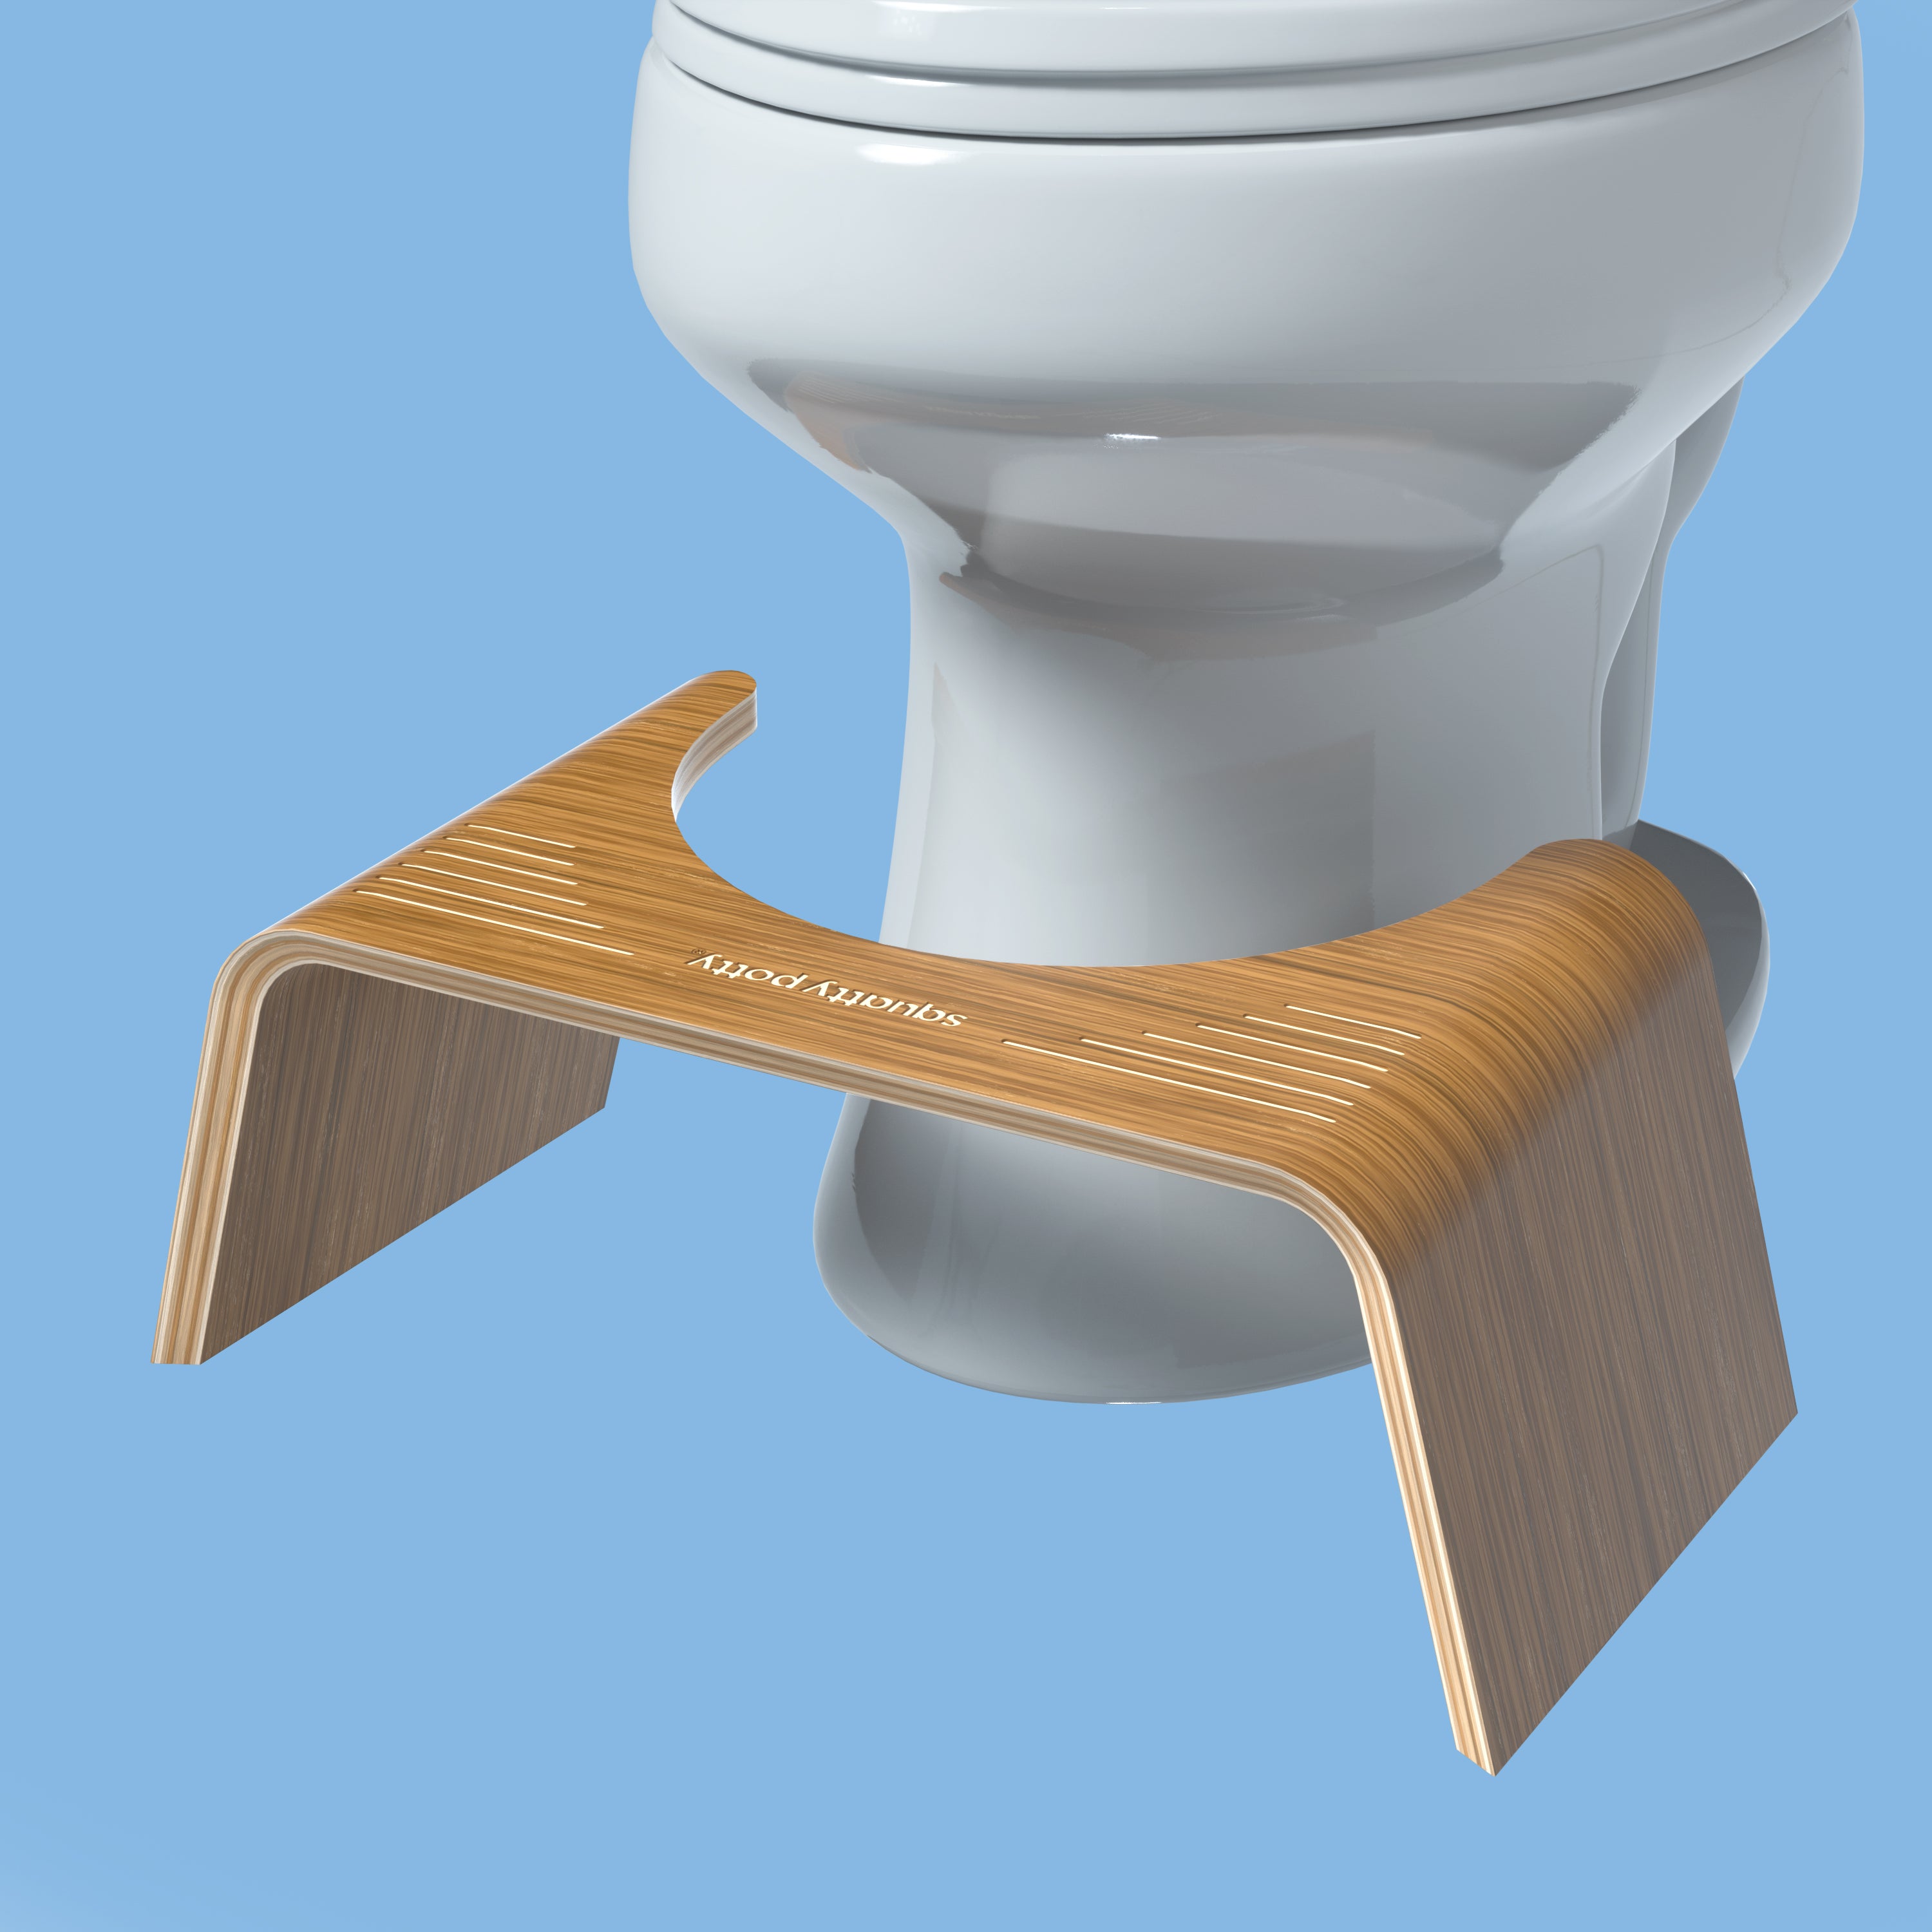 Does the Squatty Potty Actually Work?